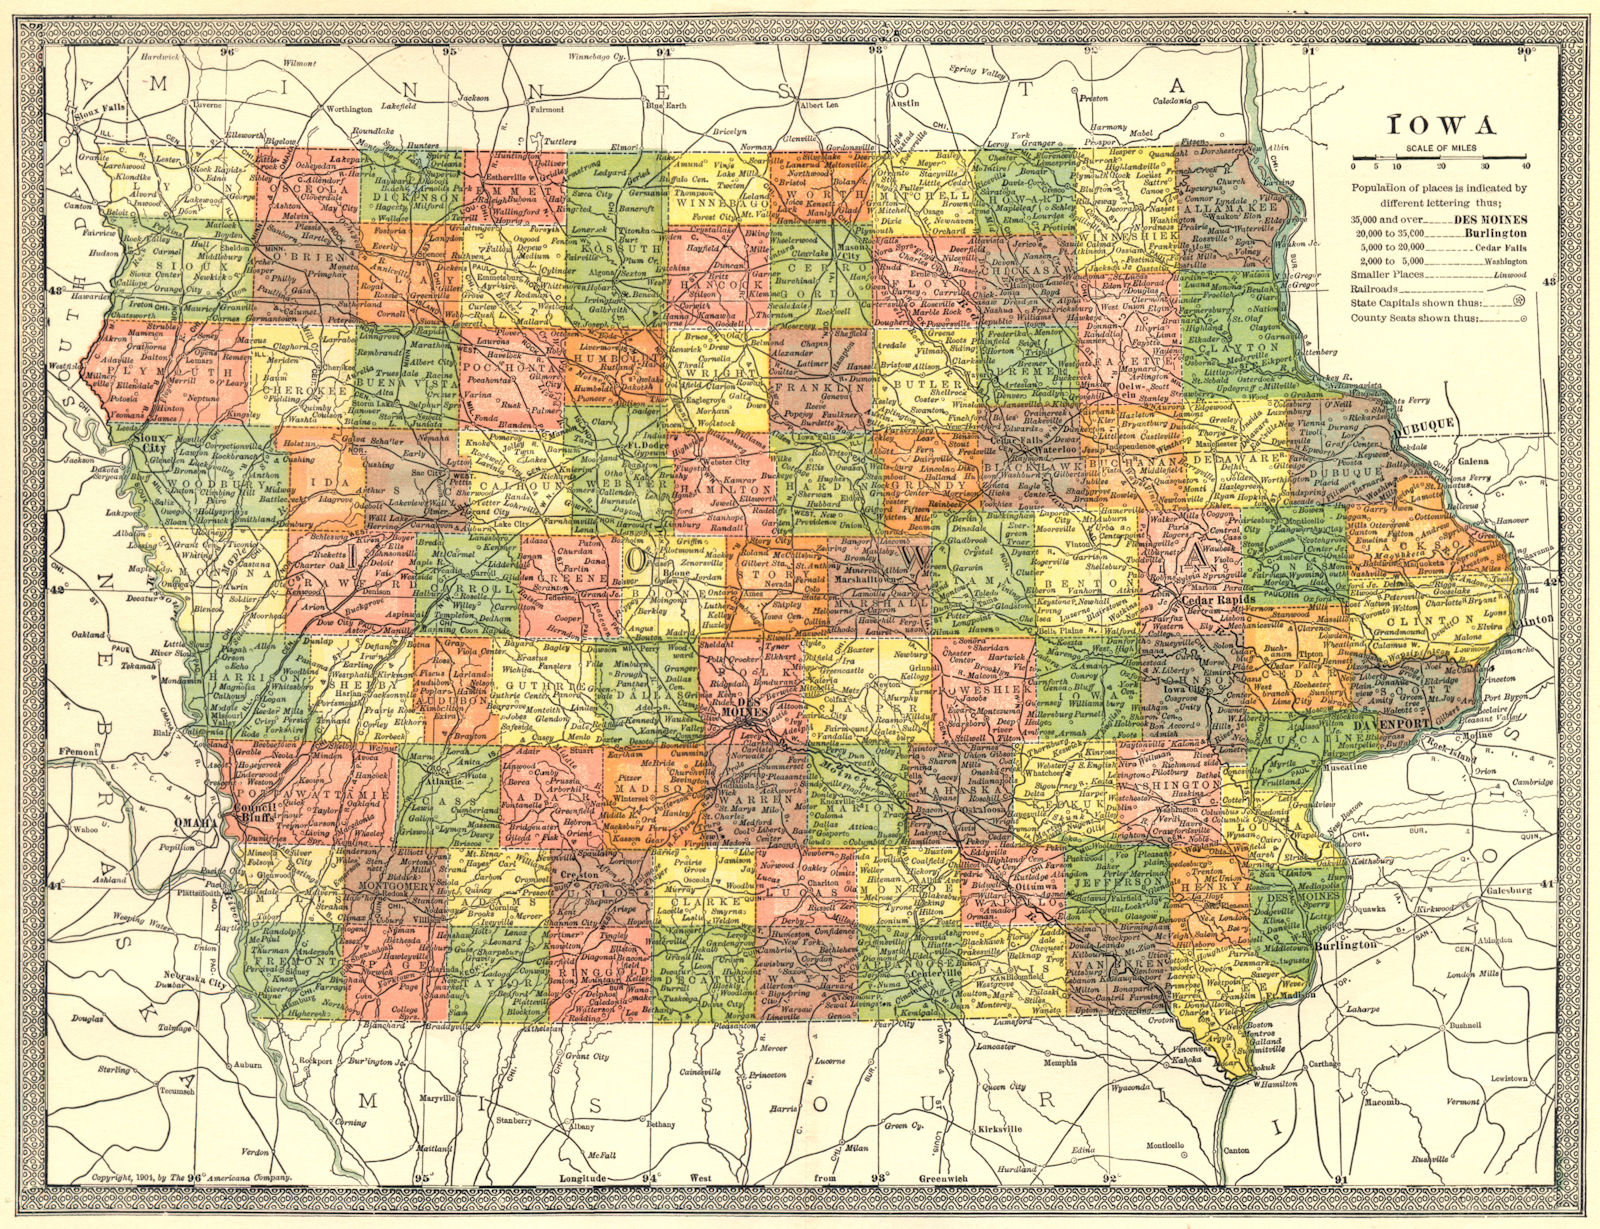 Associate Product IOWA state map. Counties 1907 old antique vintage plan chart